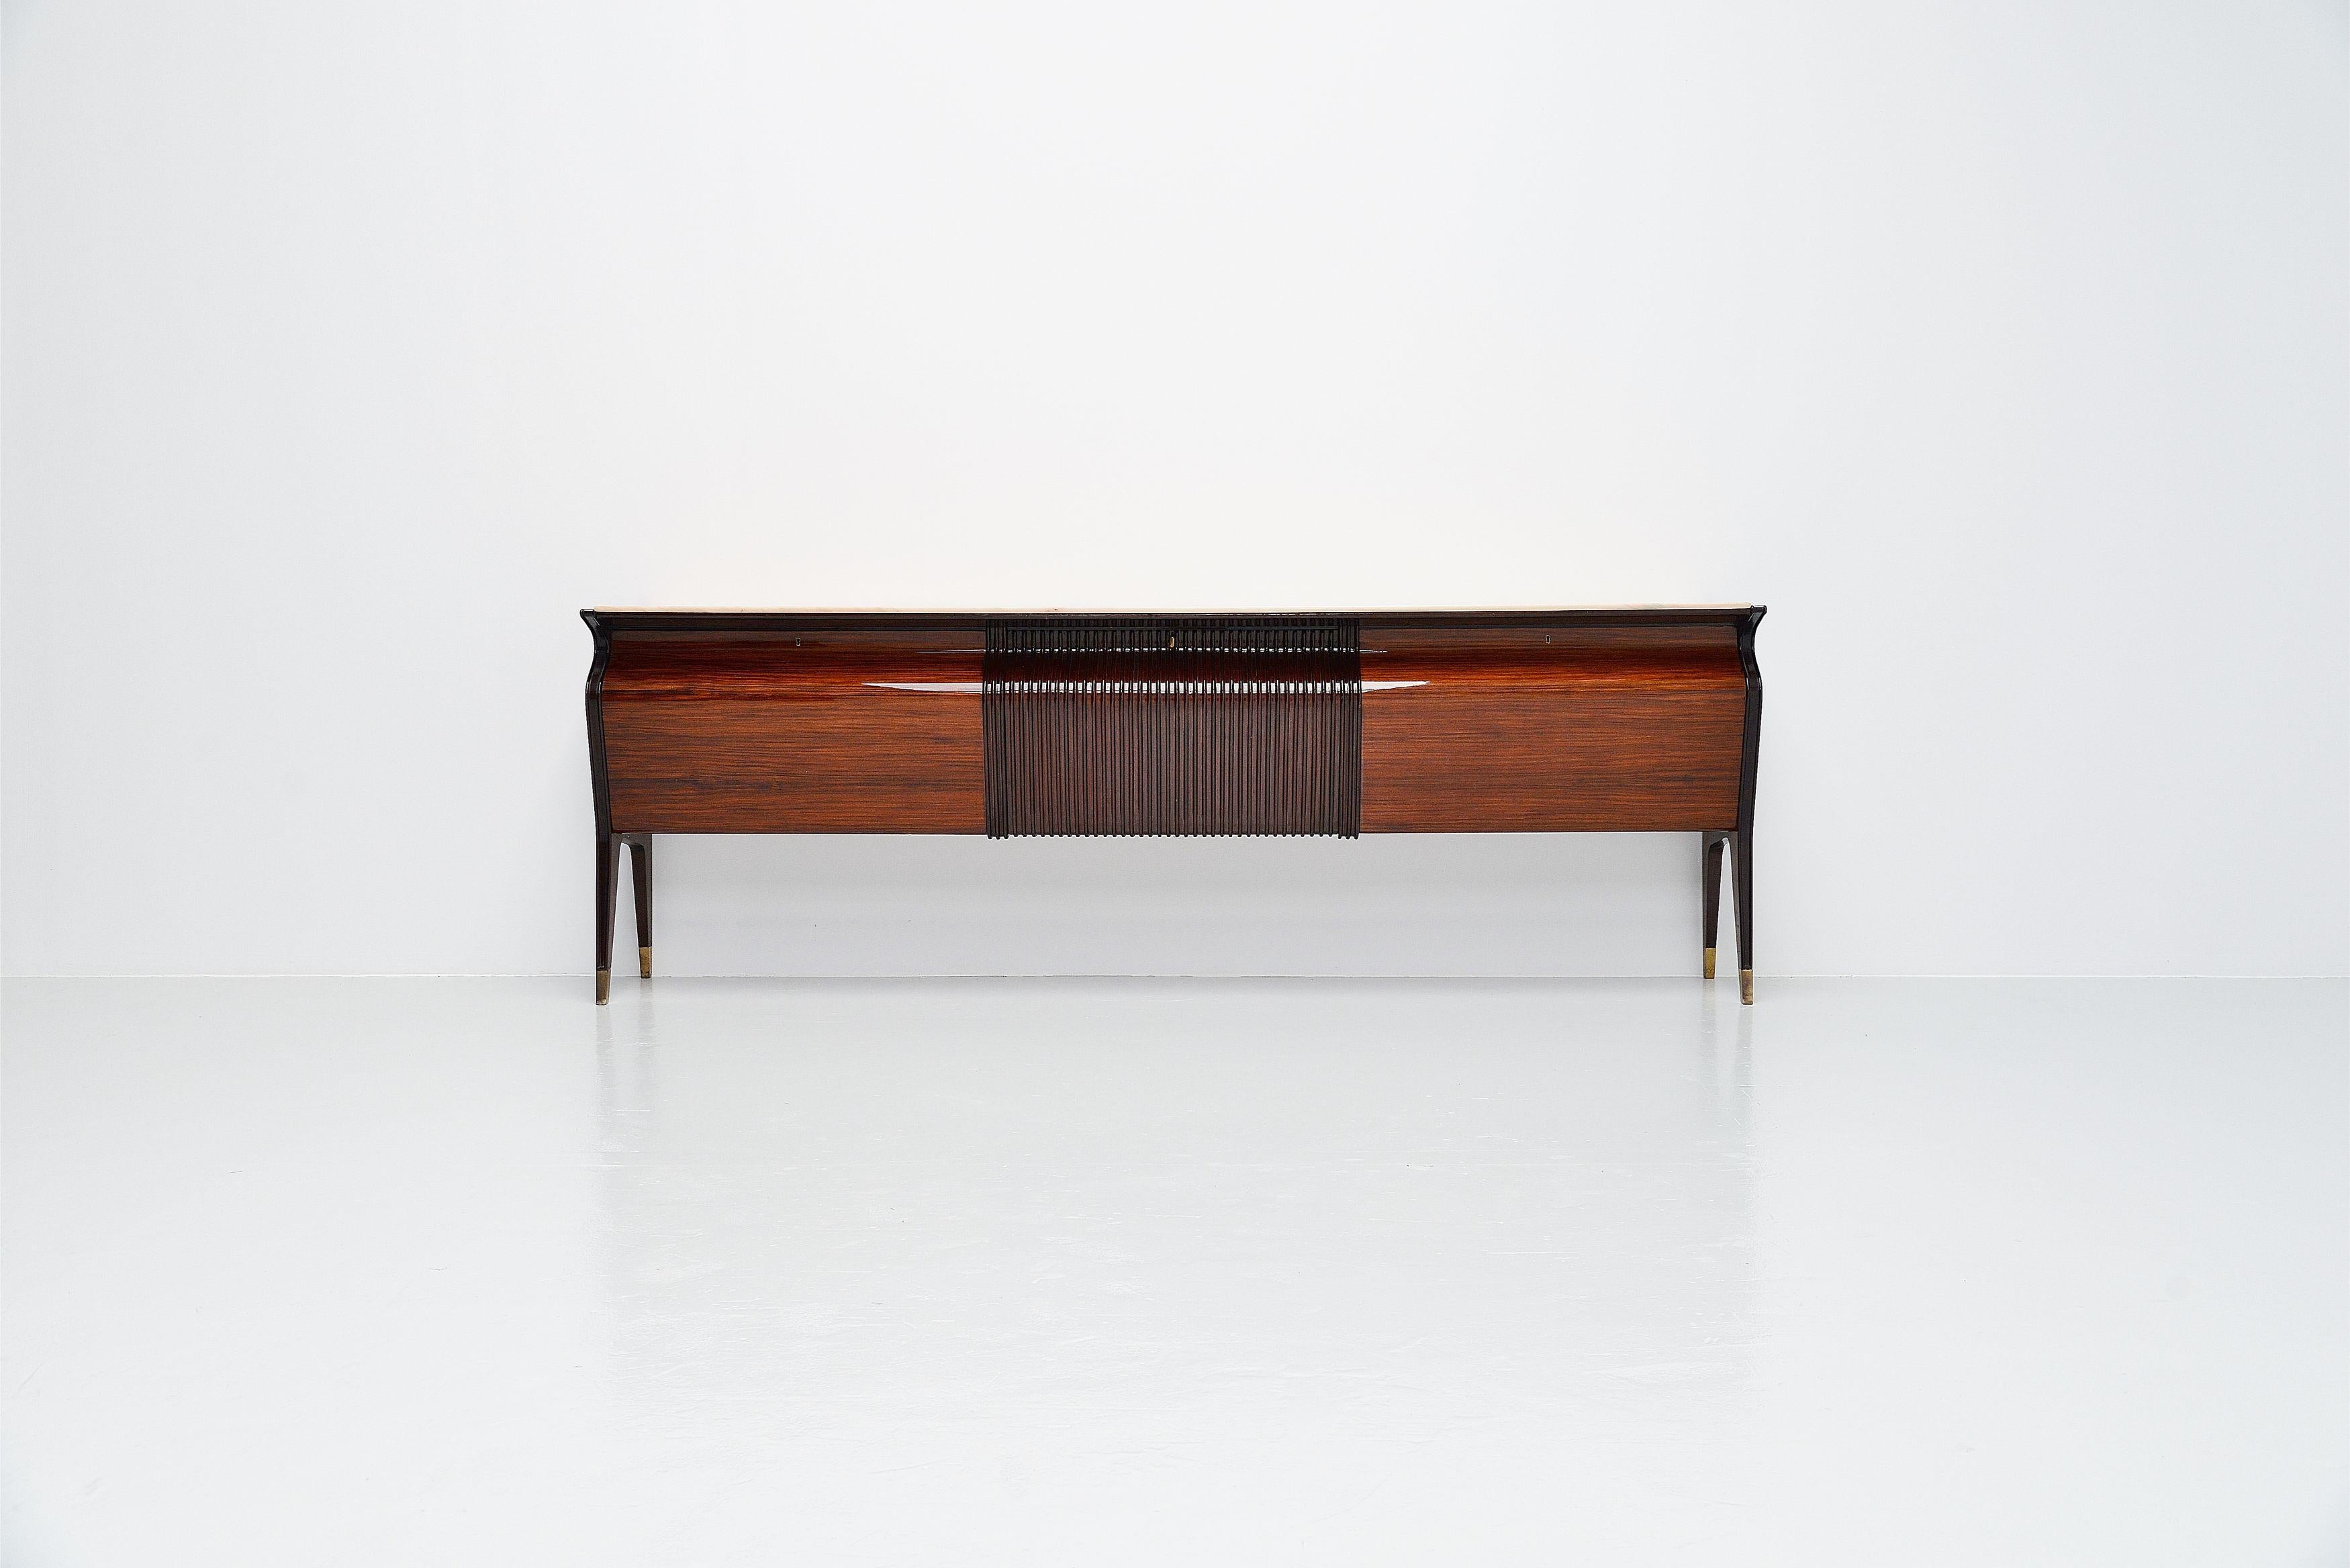 Monumental large sideboard designed by Osvaldo Borsani and manufactured by Mobilificio Fratelli Turri, Italy 1955. This sideboard has rosewood veneer, high gloss finished structure with brass feet. The top is made of marble. The sideboard has